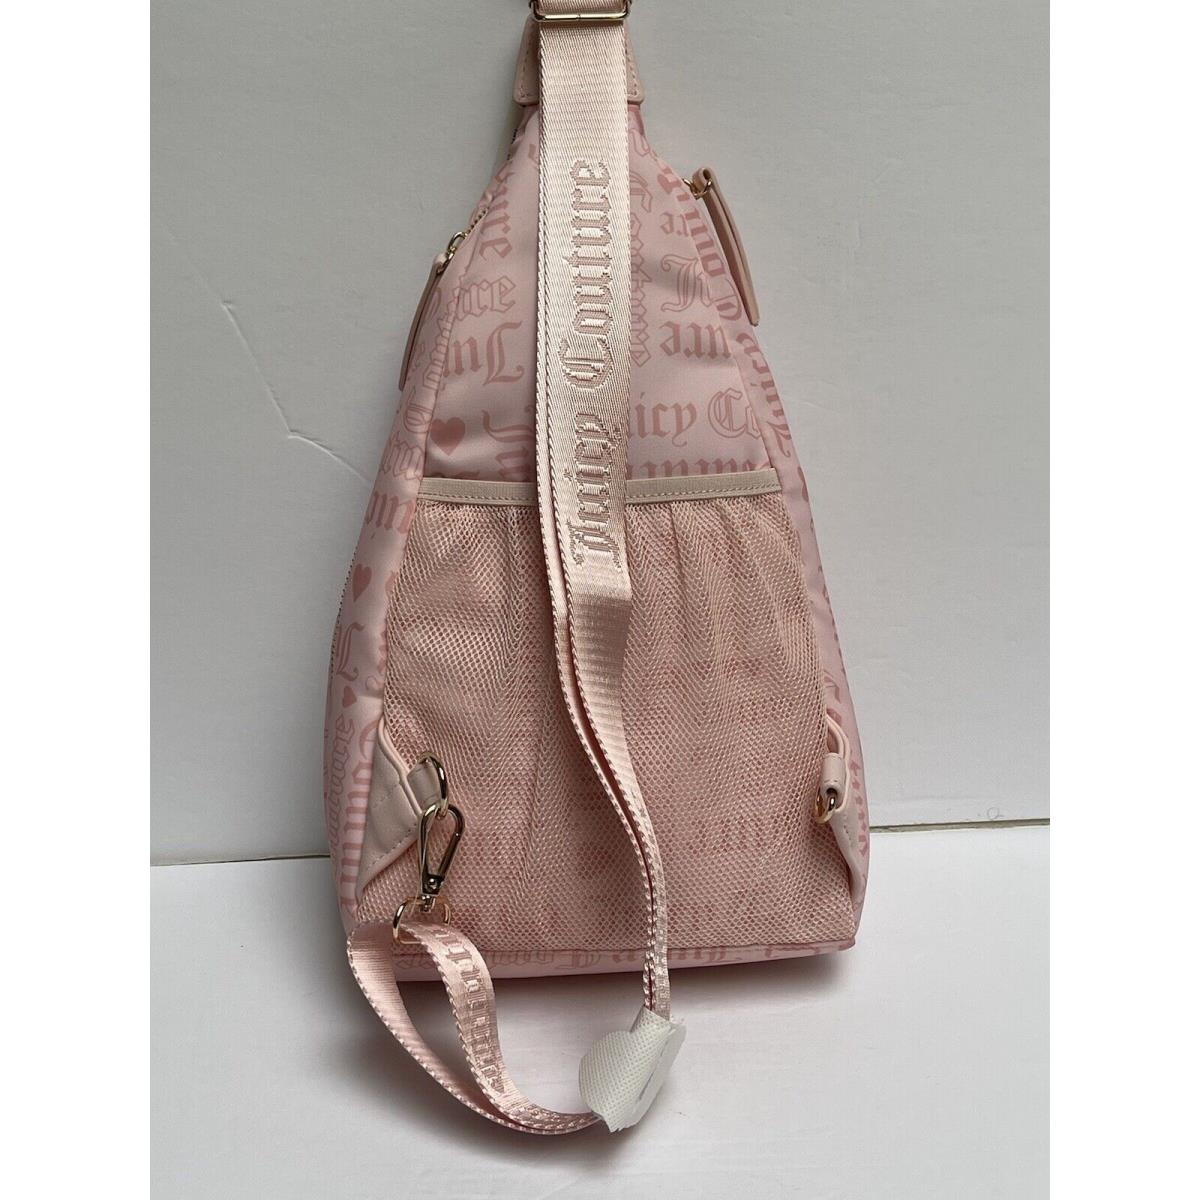 Juicy Couture Material Girl Sling Backpack Bag Powder Blush